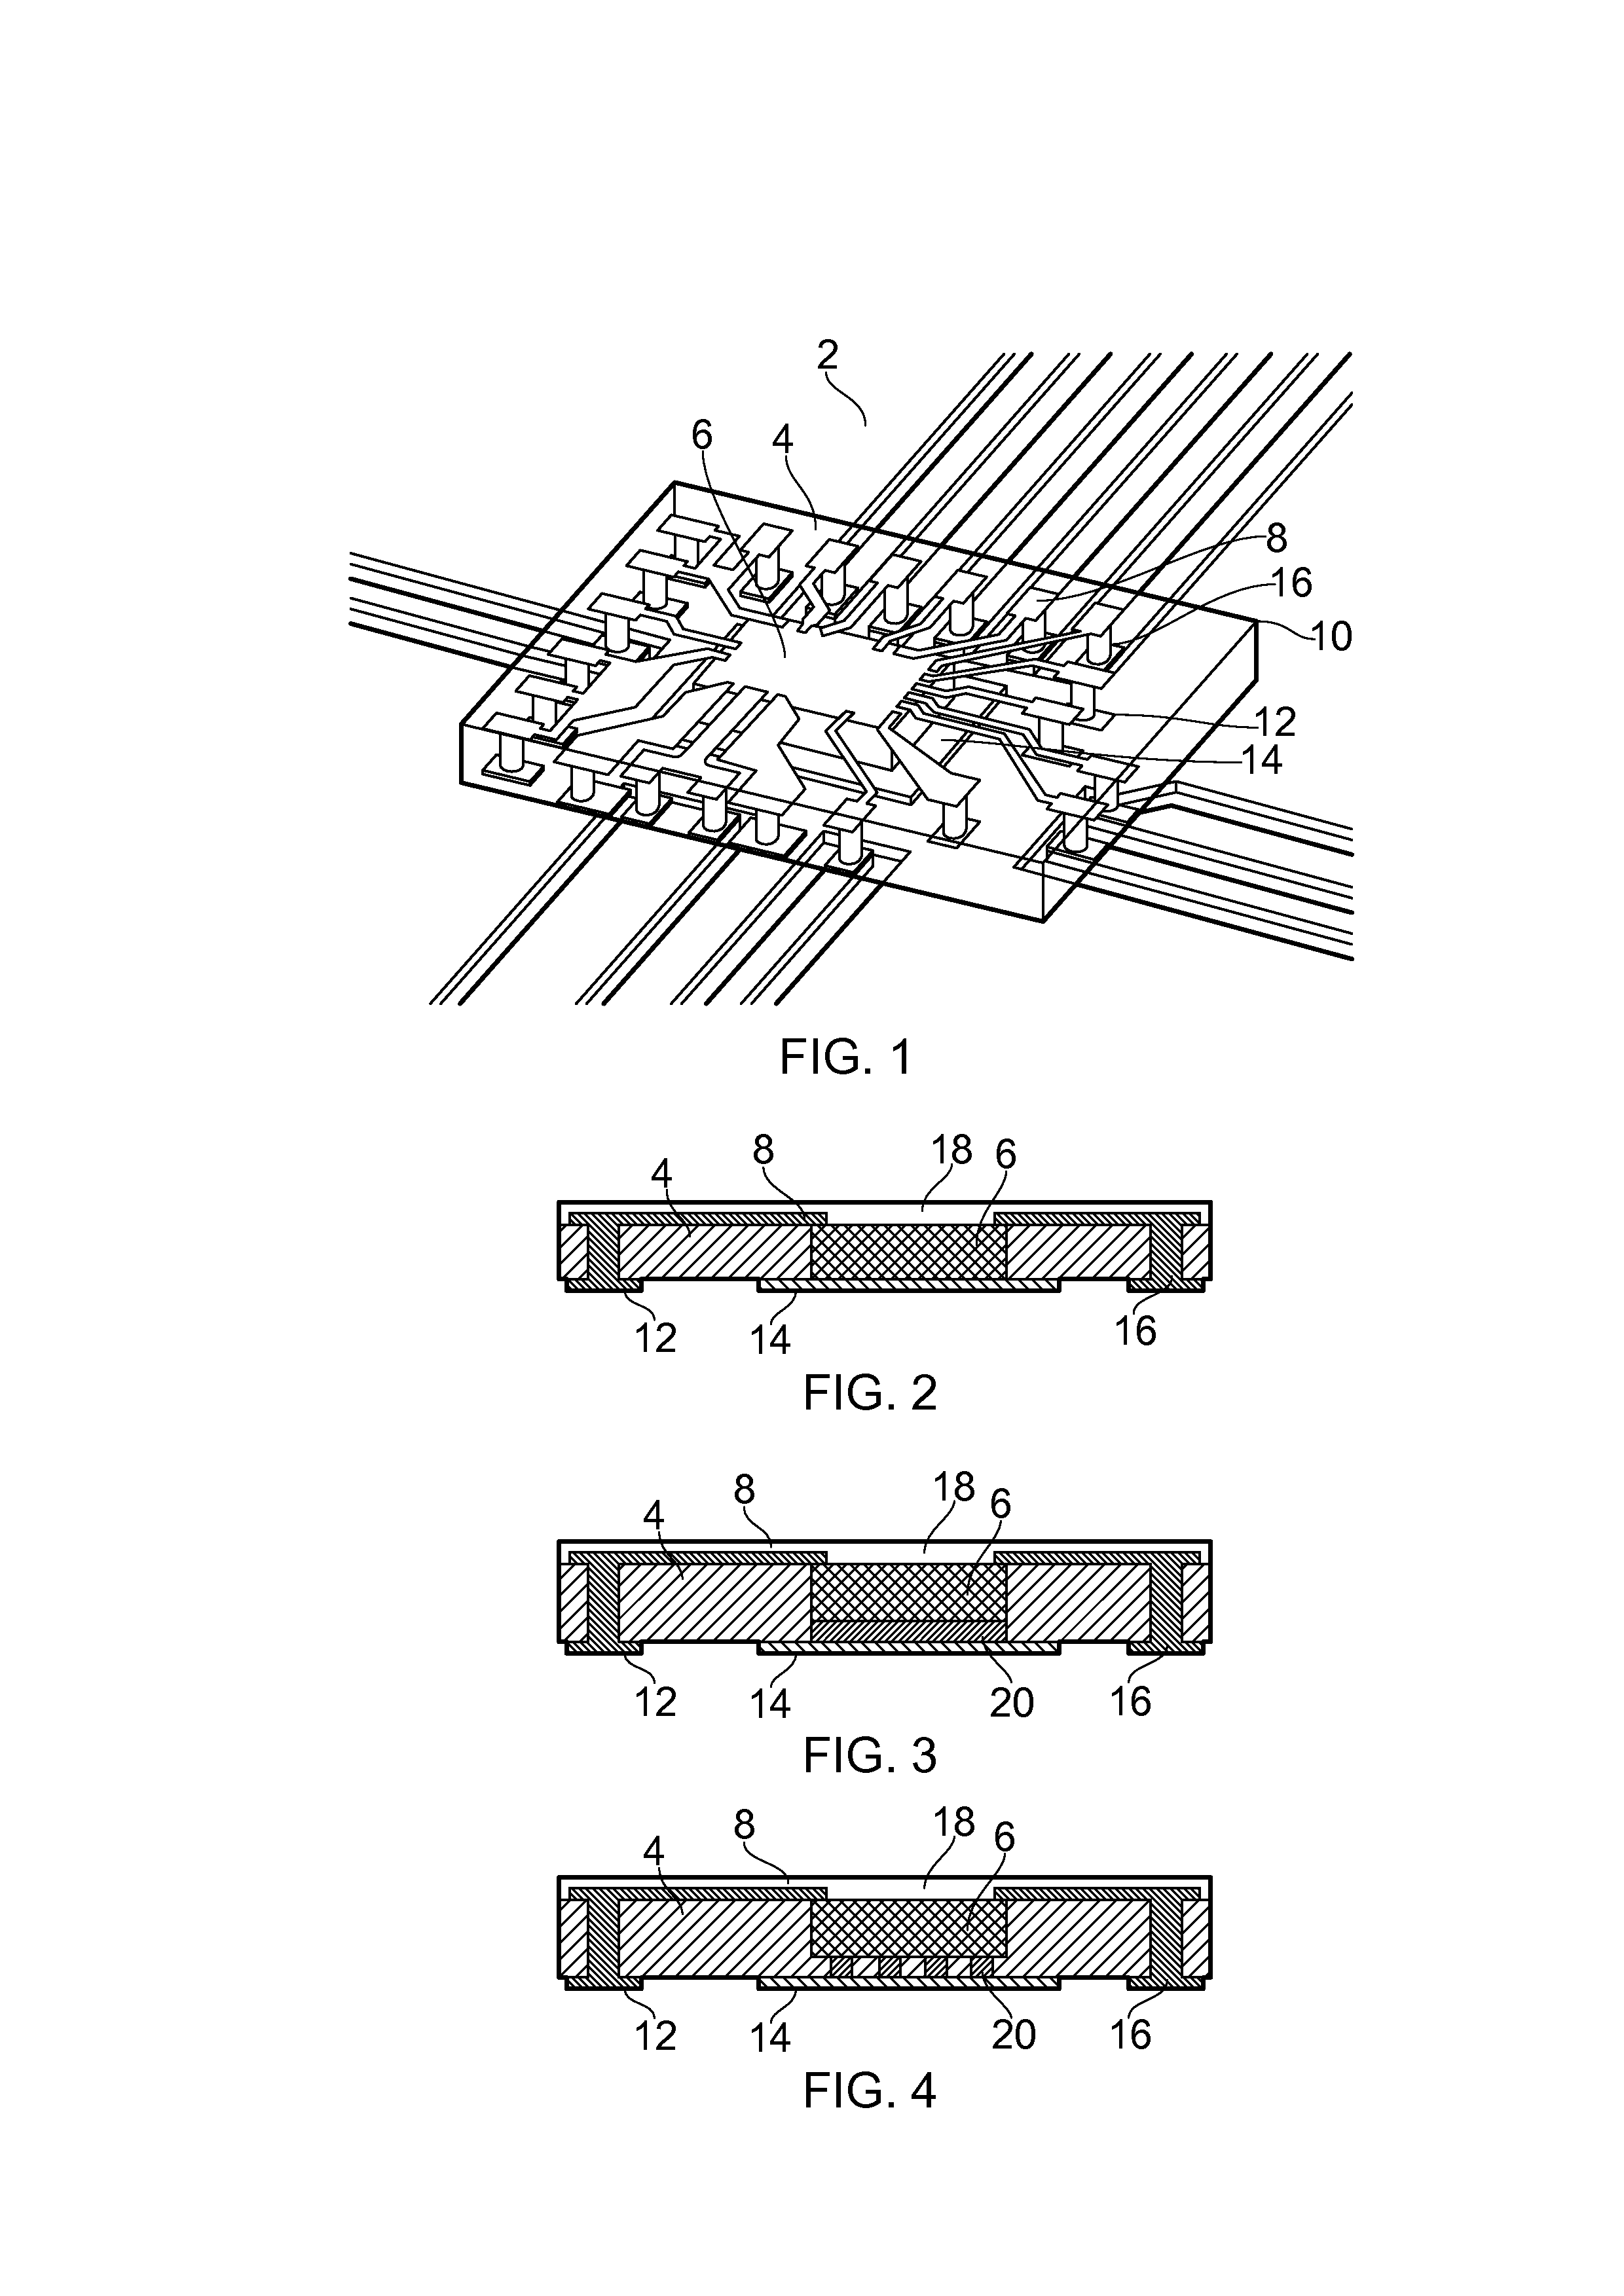 Semiconductor package with improved thermal properties